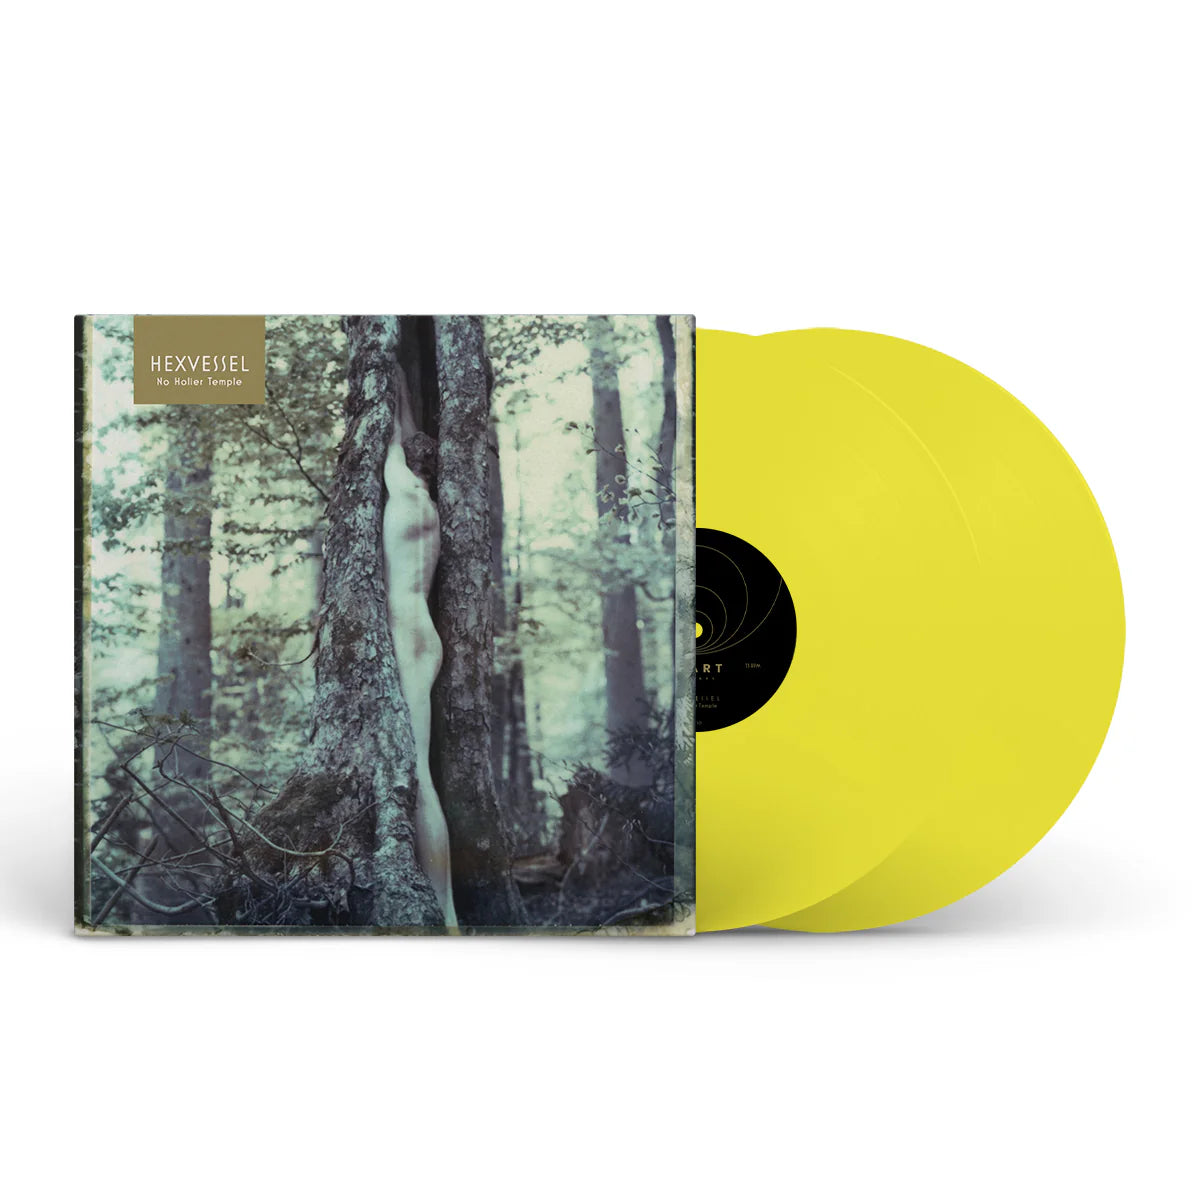 Hexvessel - No Holier Temple "10th Anniversary Reissue" (Limited Edition on Double Yellow Vinyl)